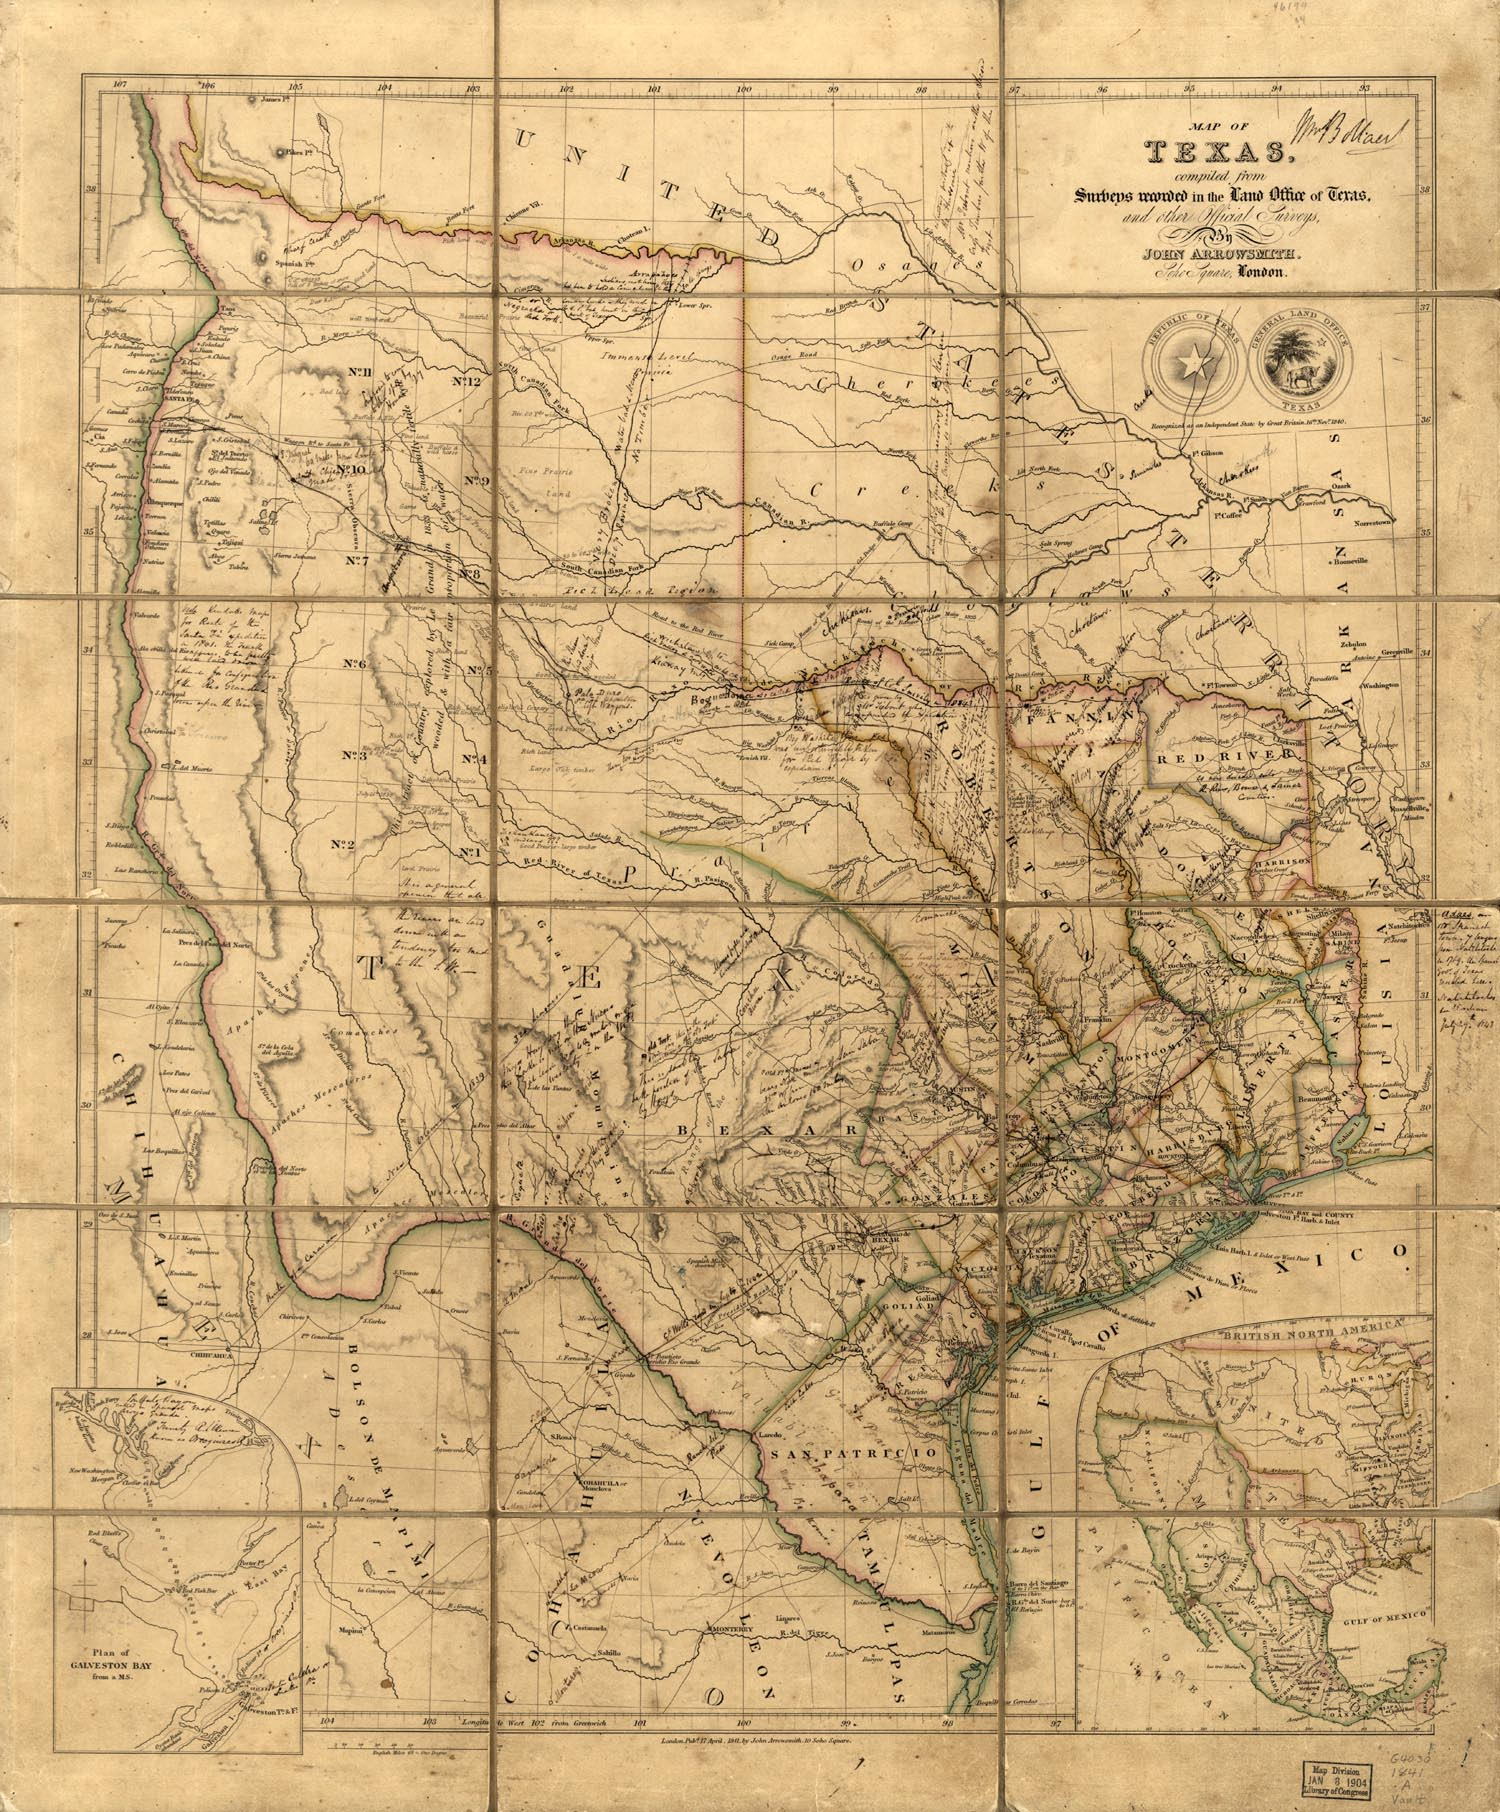 Maps Of The Republic Of Texas - Civil War In Texas Map